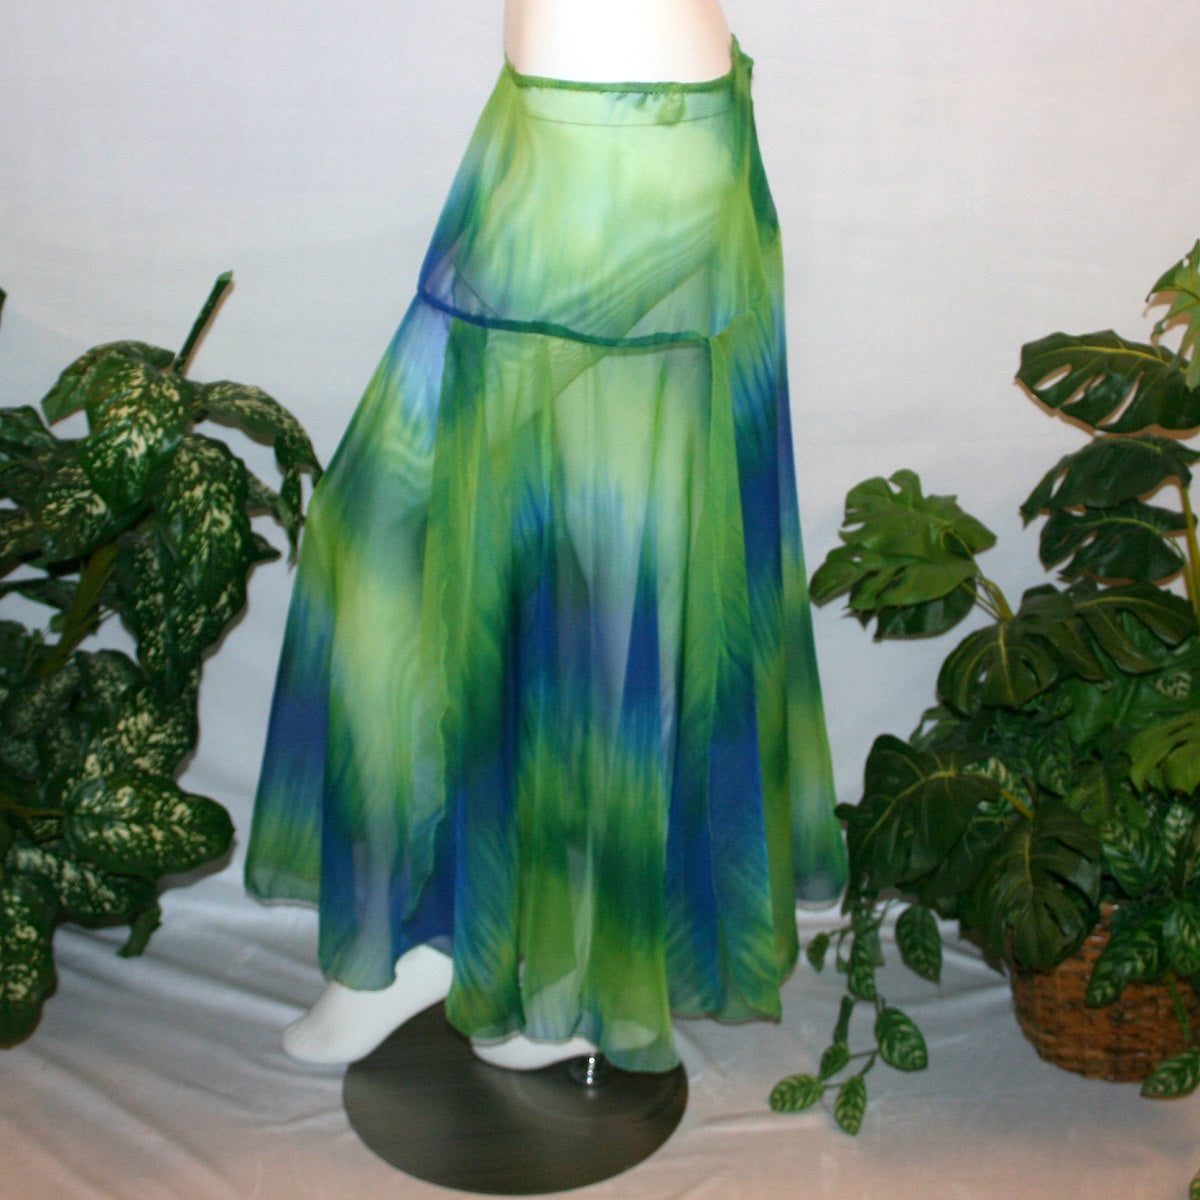 side view of Blue & green ballroom skirt created in yards of a gorgeous blue & green variegated chiffon, flows beautifully for your waltzes & foxtrots.